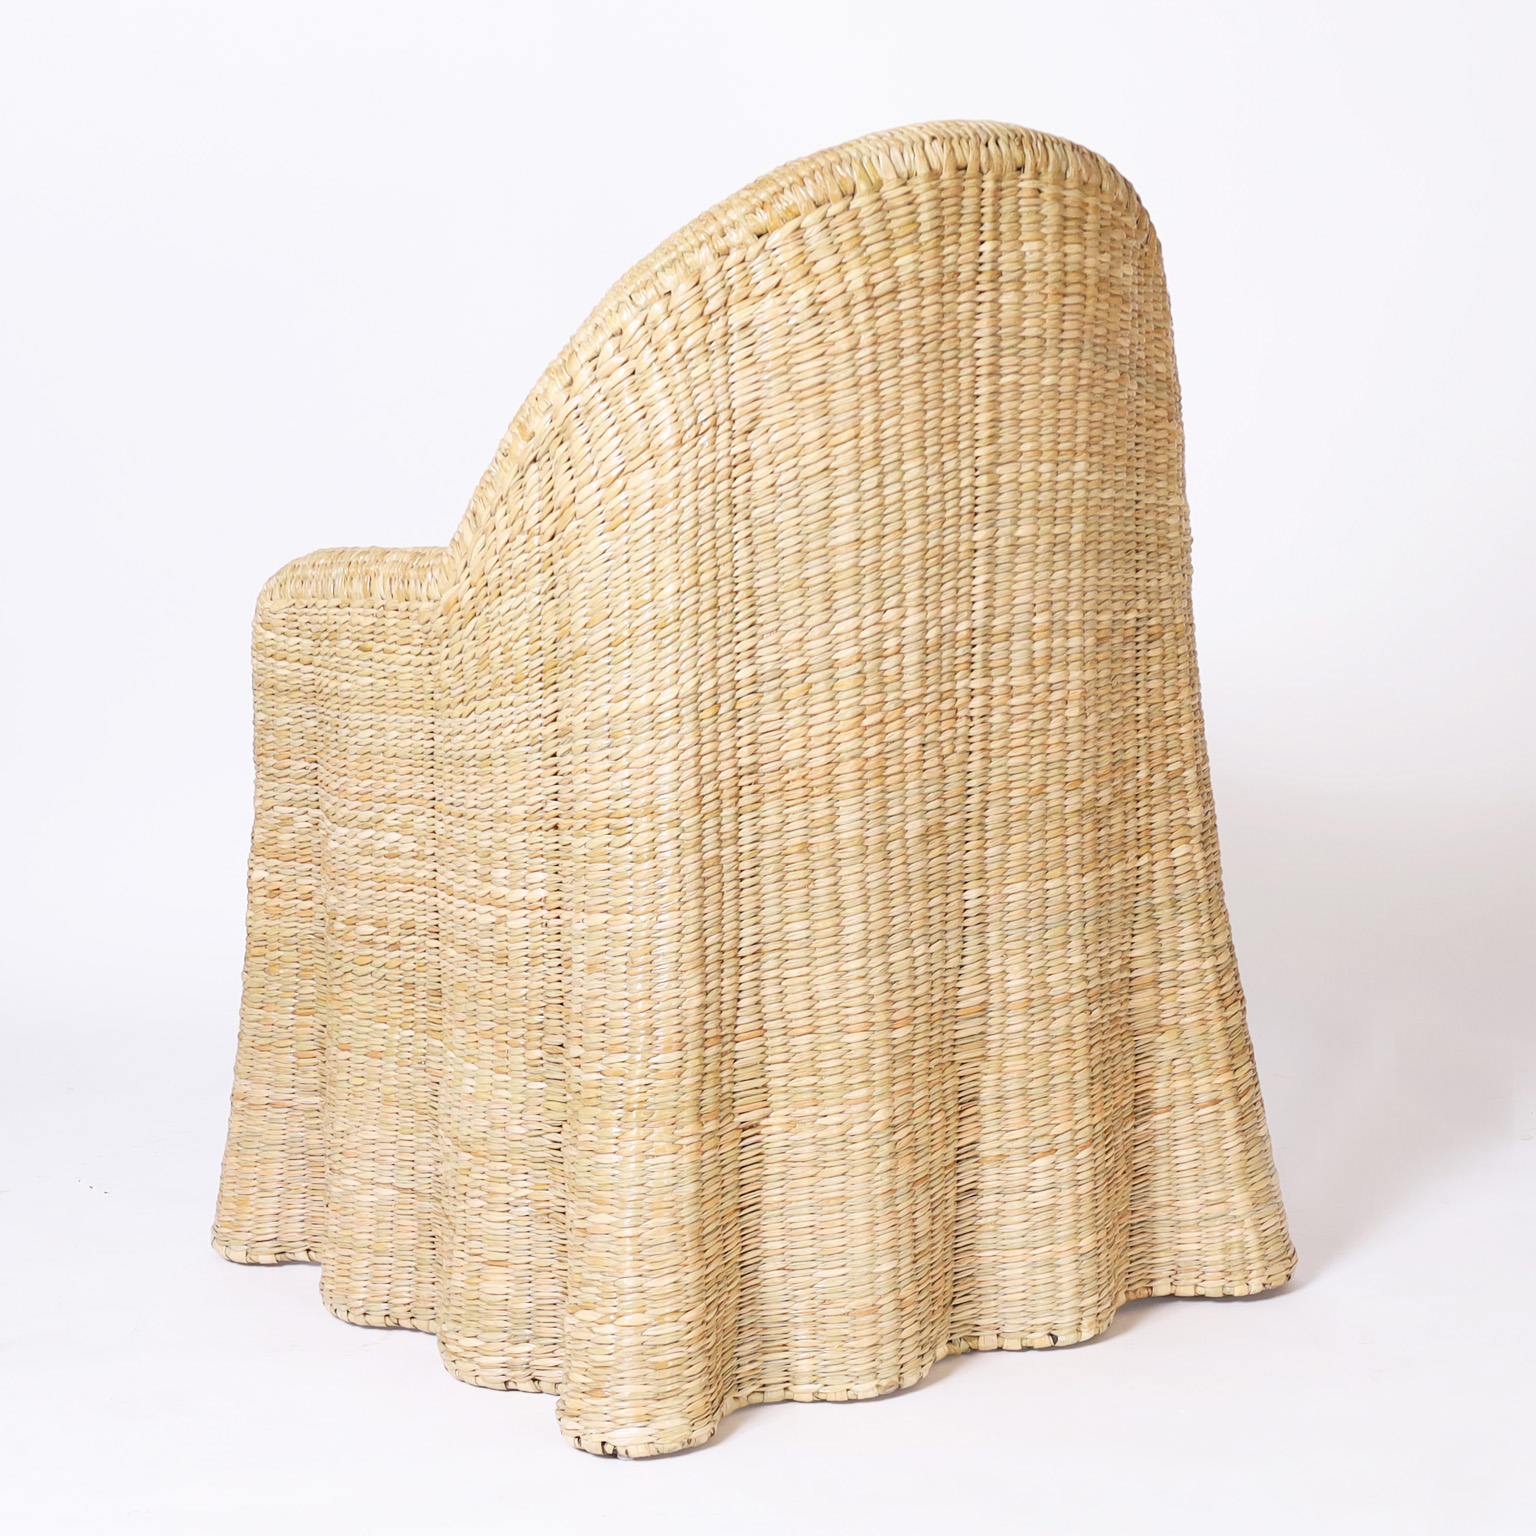 Wicker Drapery Ghost Armchairs by the FS Flores Collection